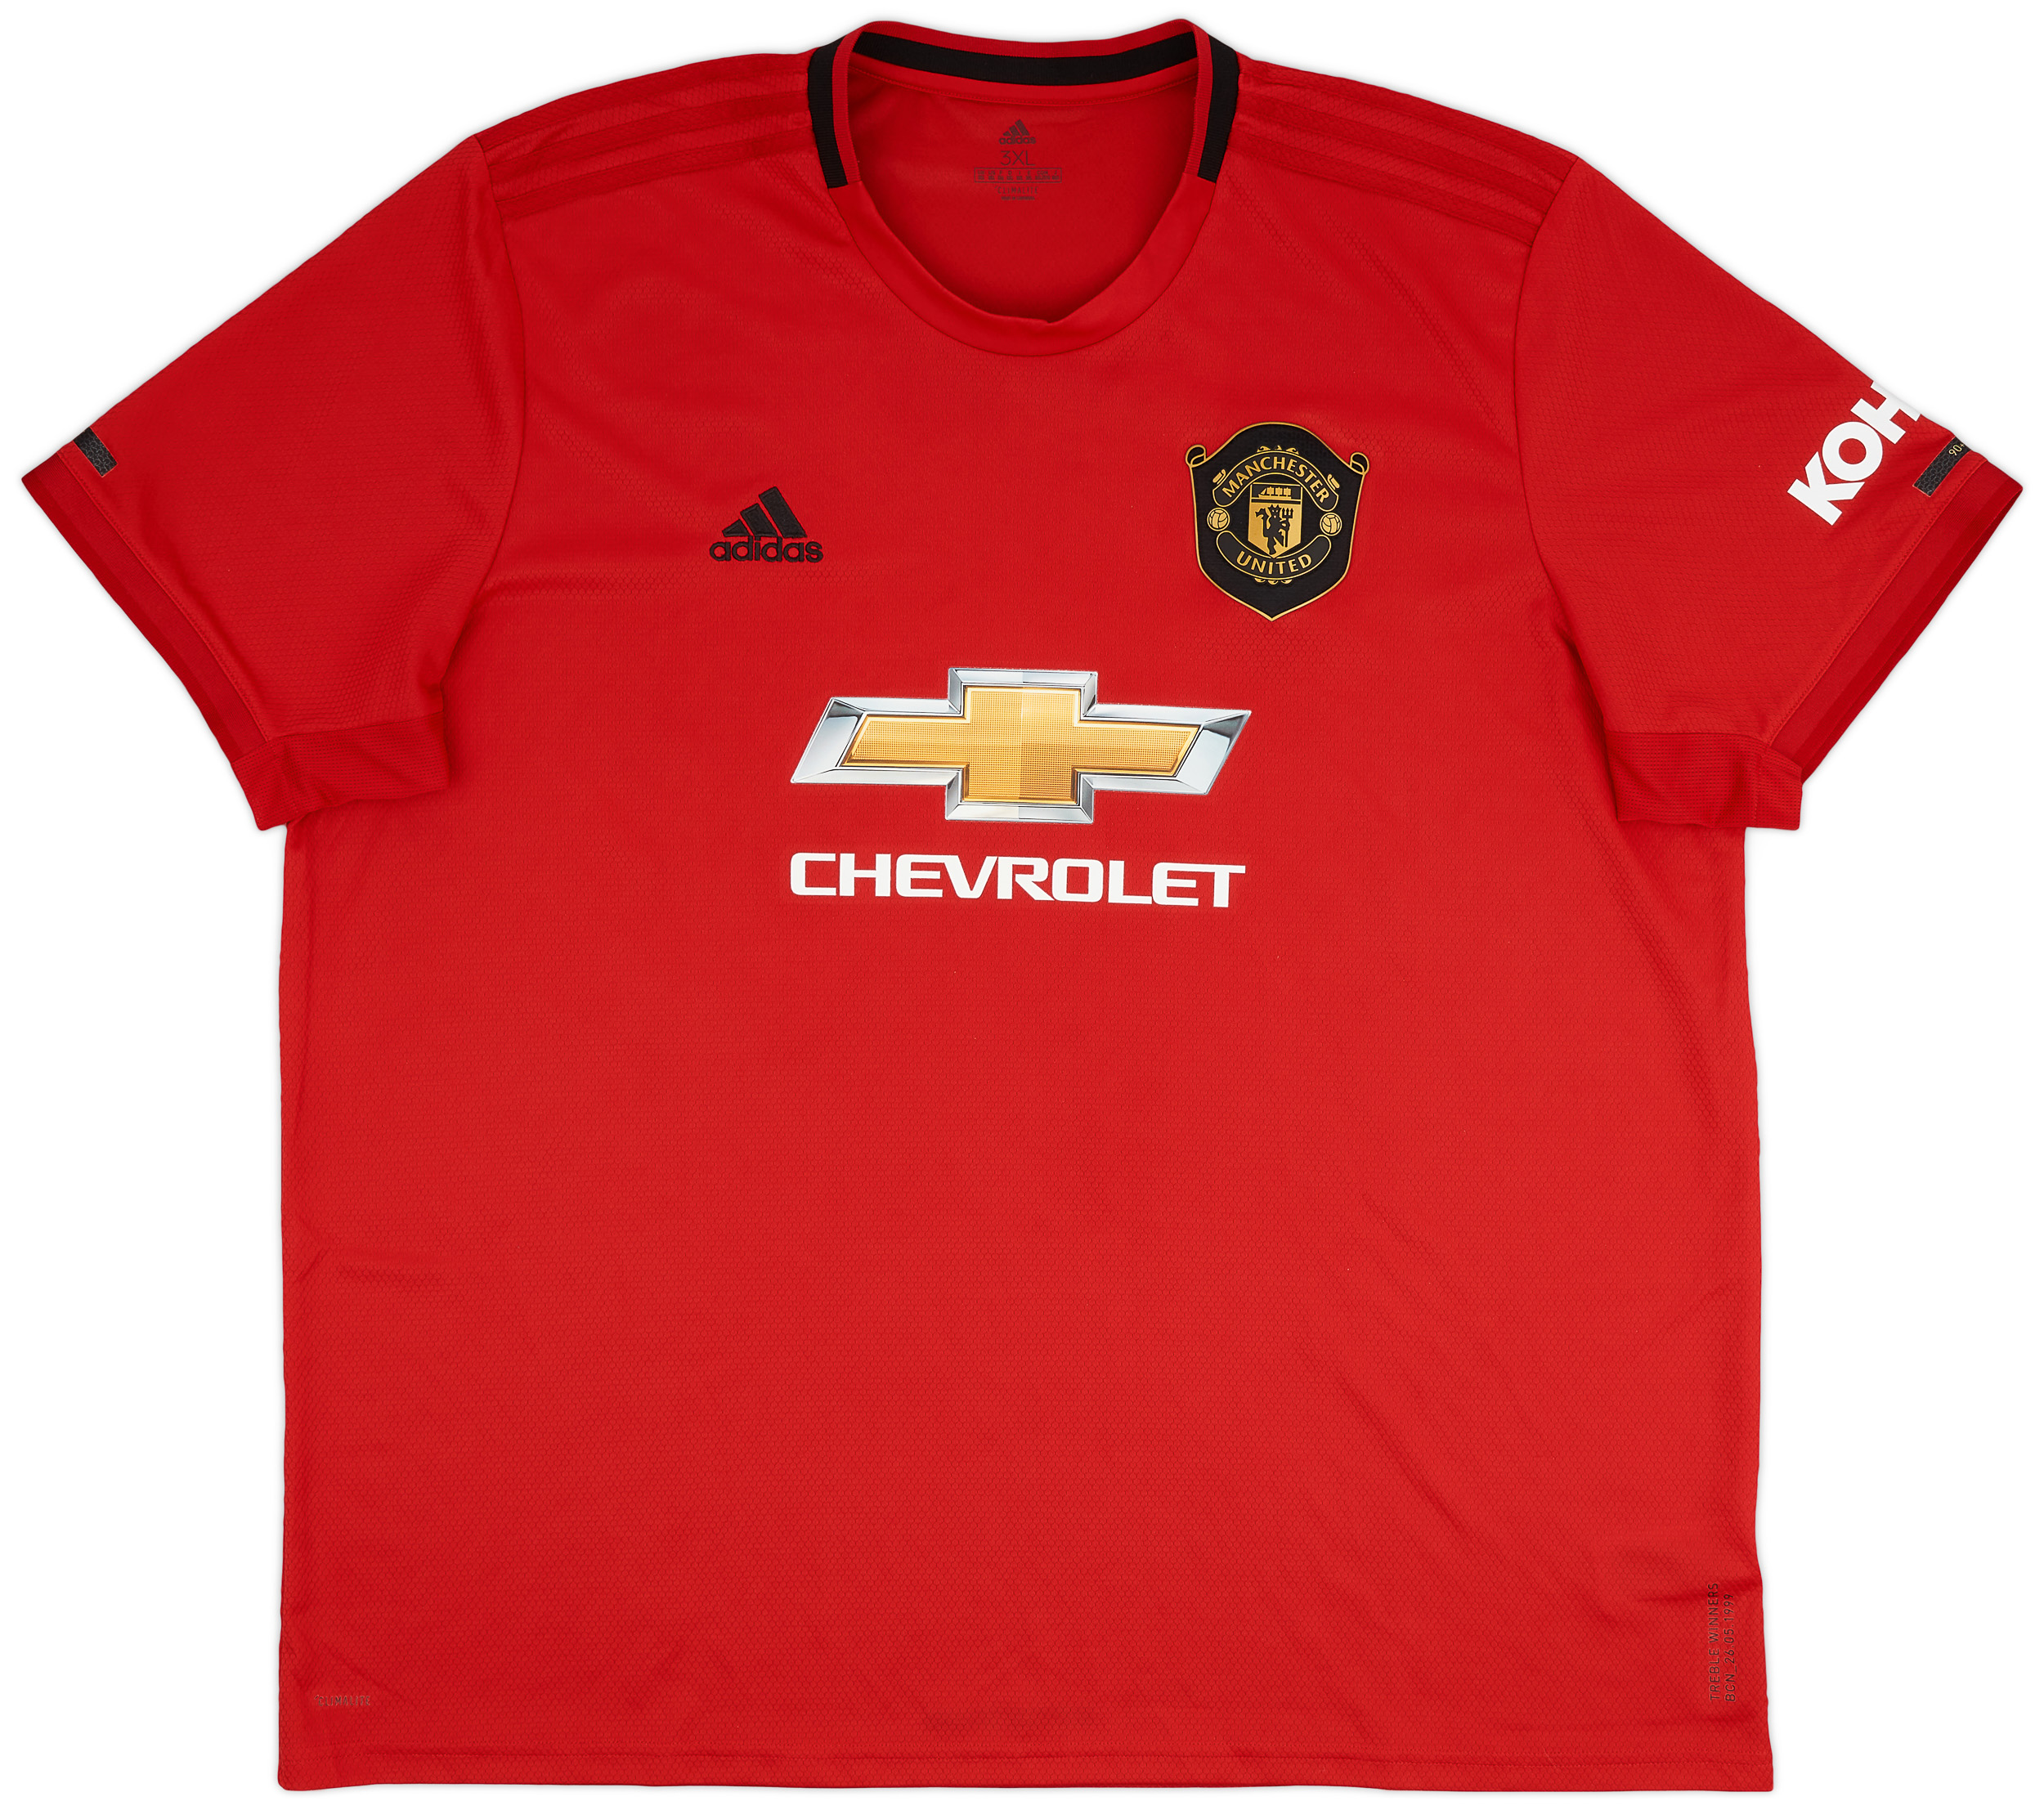 2019-20 Manchester United Home Shirt - 10/10 - ()